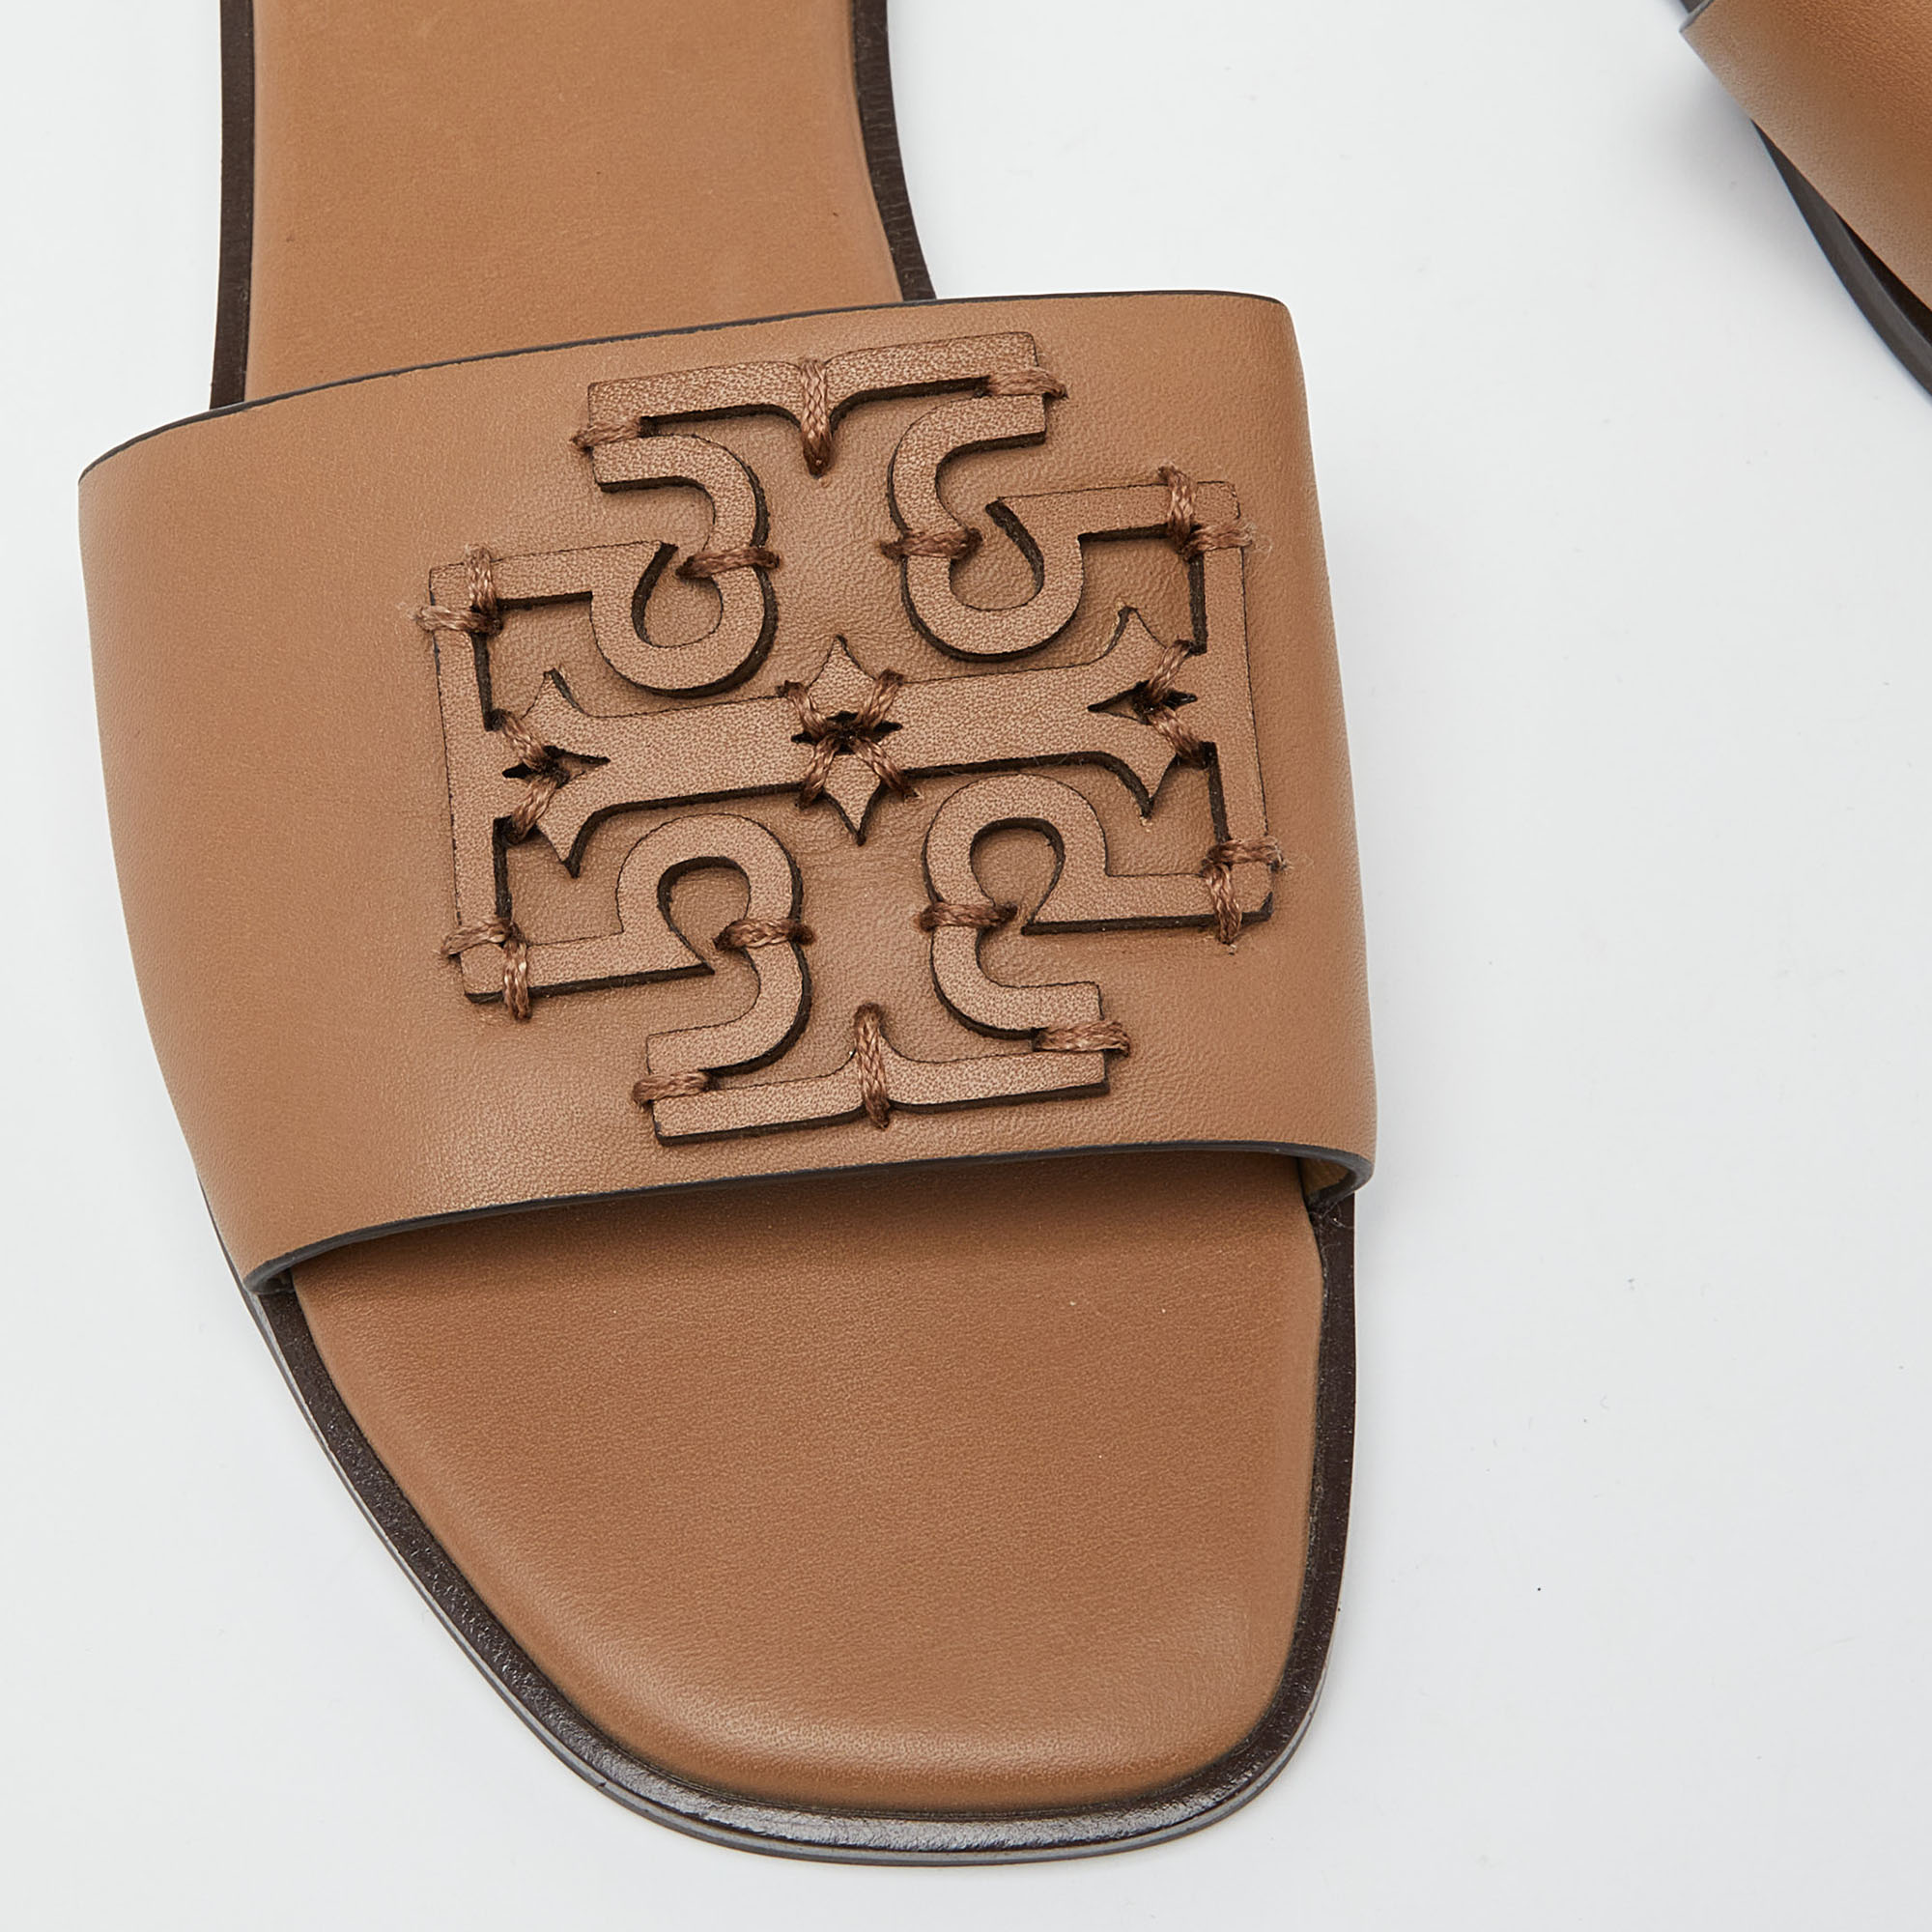 Tory Burch Beige Leather Ines Slide Sandals Size 38